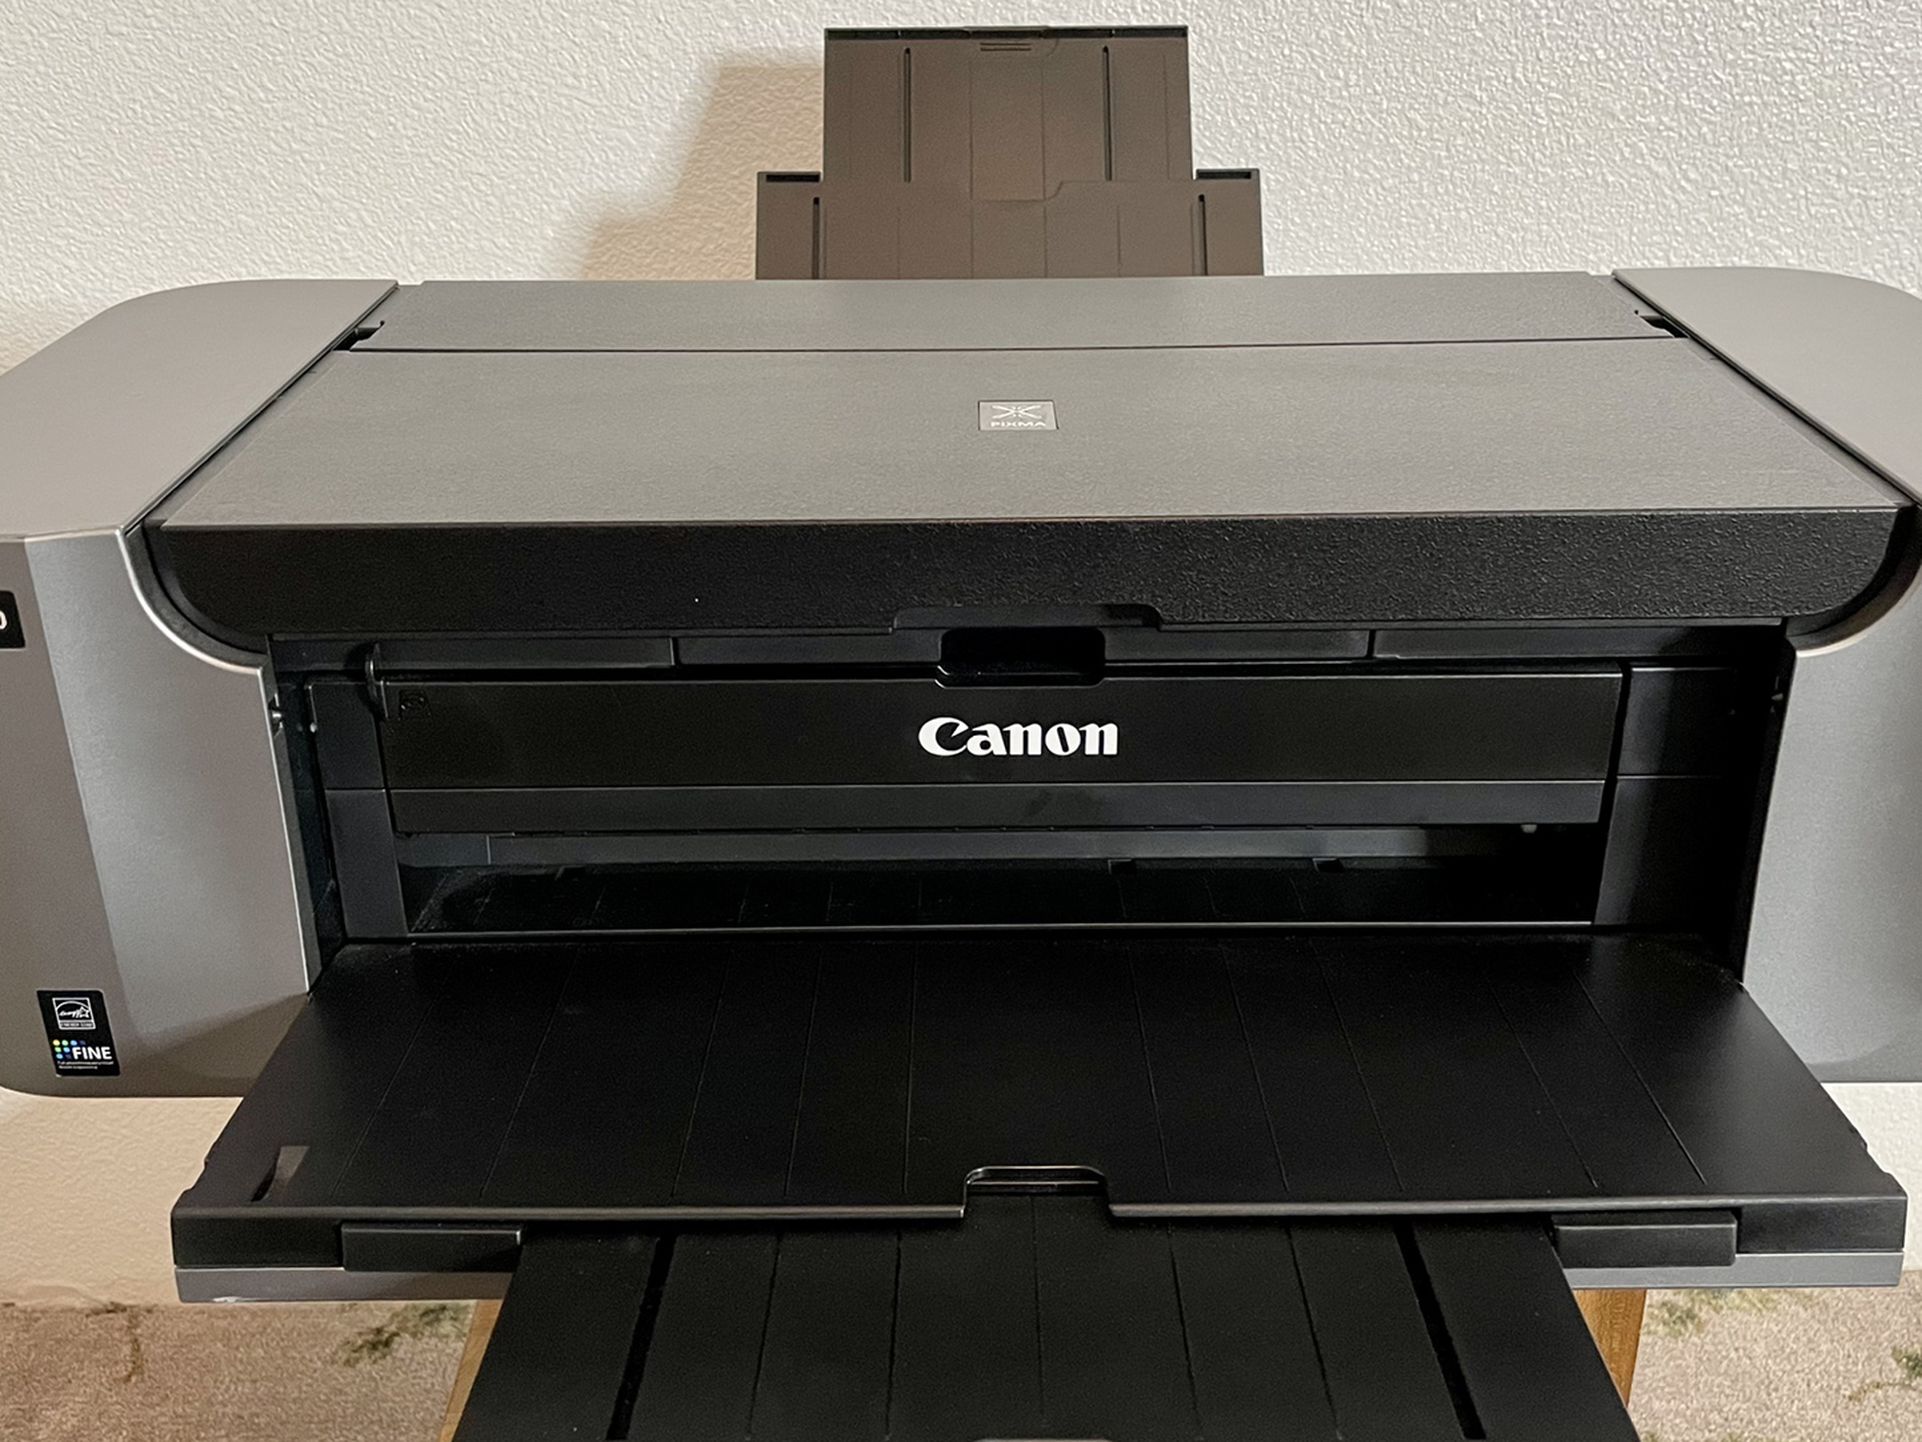 Canon Pixma Pro-100 Wireless Color Professional Inkjet Printer with Airprint and Mobile Device Printing